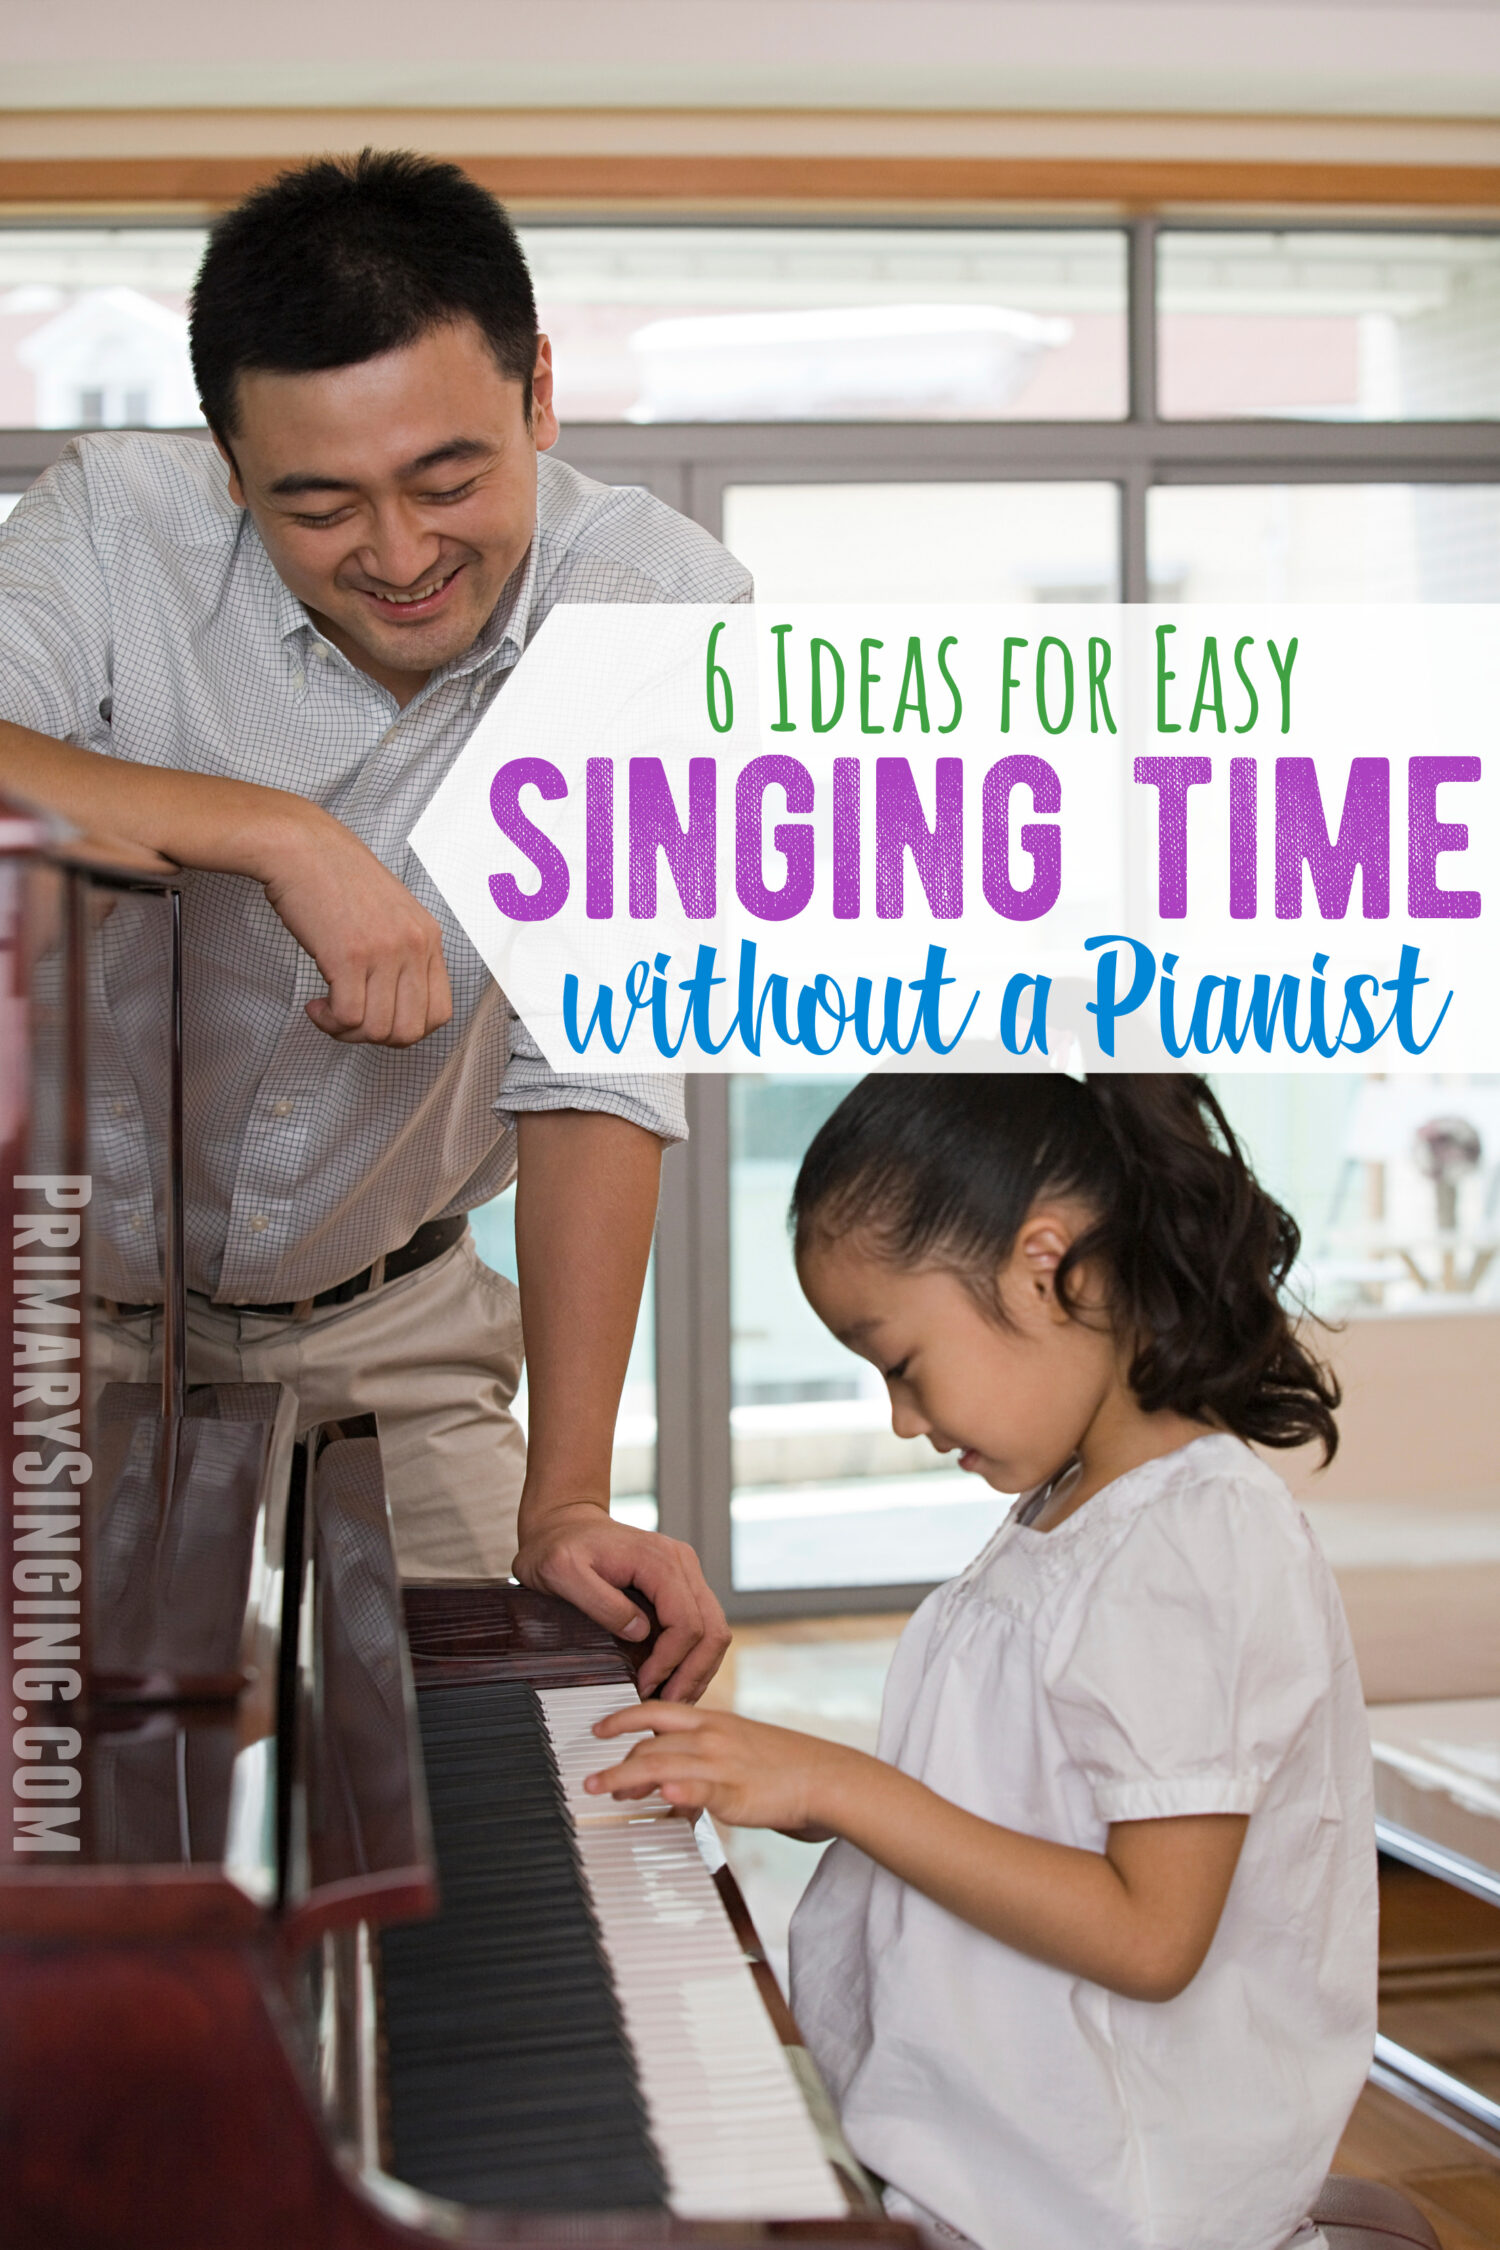 Ideas for an easy Singing Time without a Pianist! Have you ever had a last minute cancellation from your pianist and wondered what to do? Here are 6 easy ideas to help you have a wonderful singing time, even without the help of a piano accompaniment. 